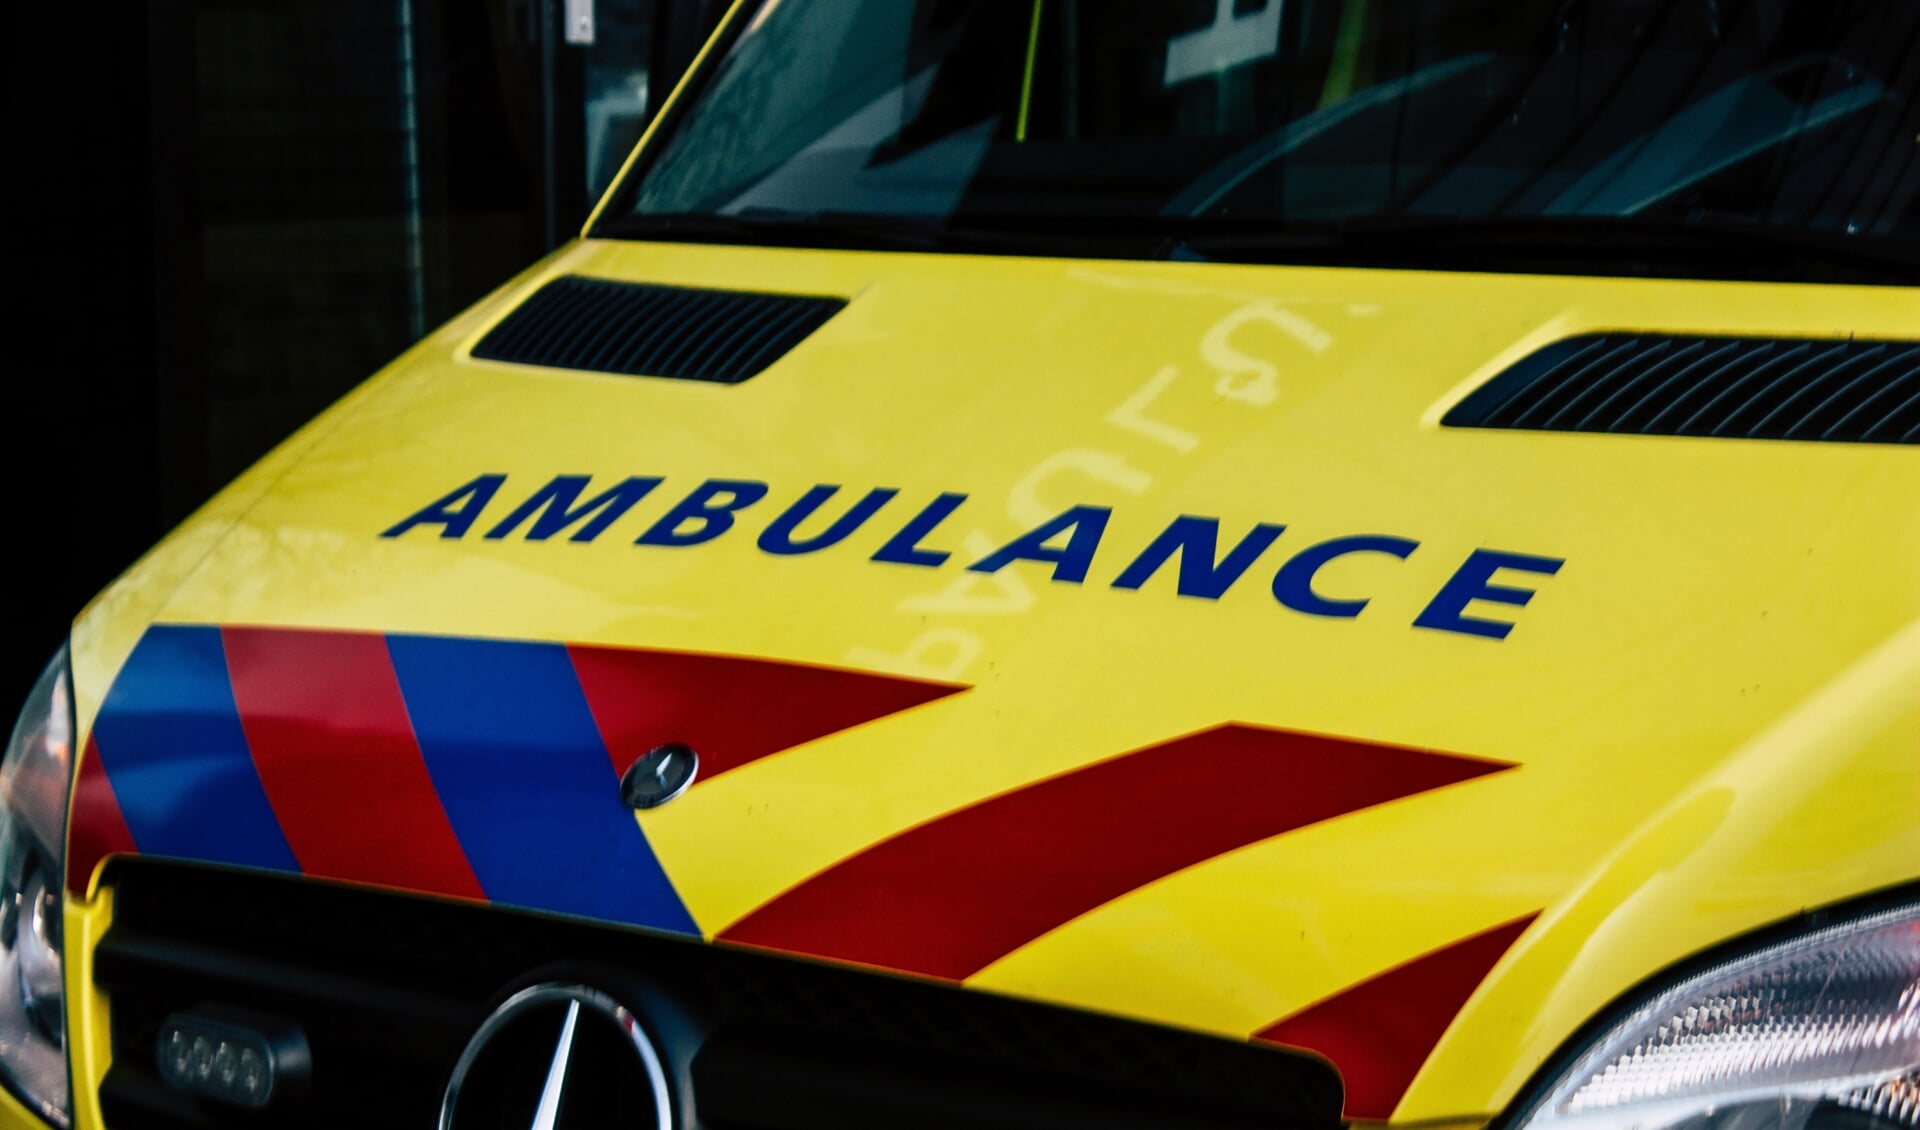 Rotterdam Netherlands April 1, 2019 View of a Dutch yellow ambulance parked in the streets of Rotterdam in the afternoon